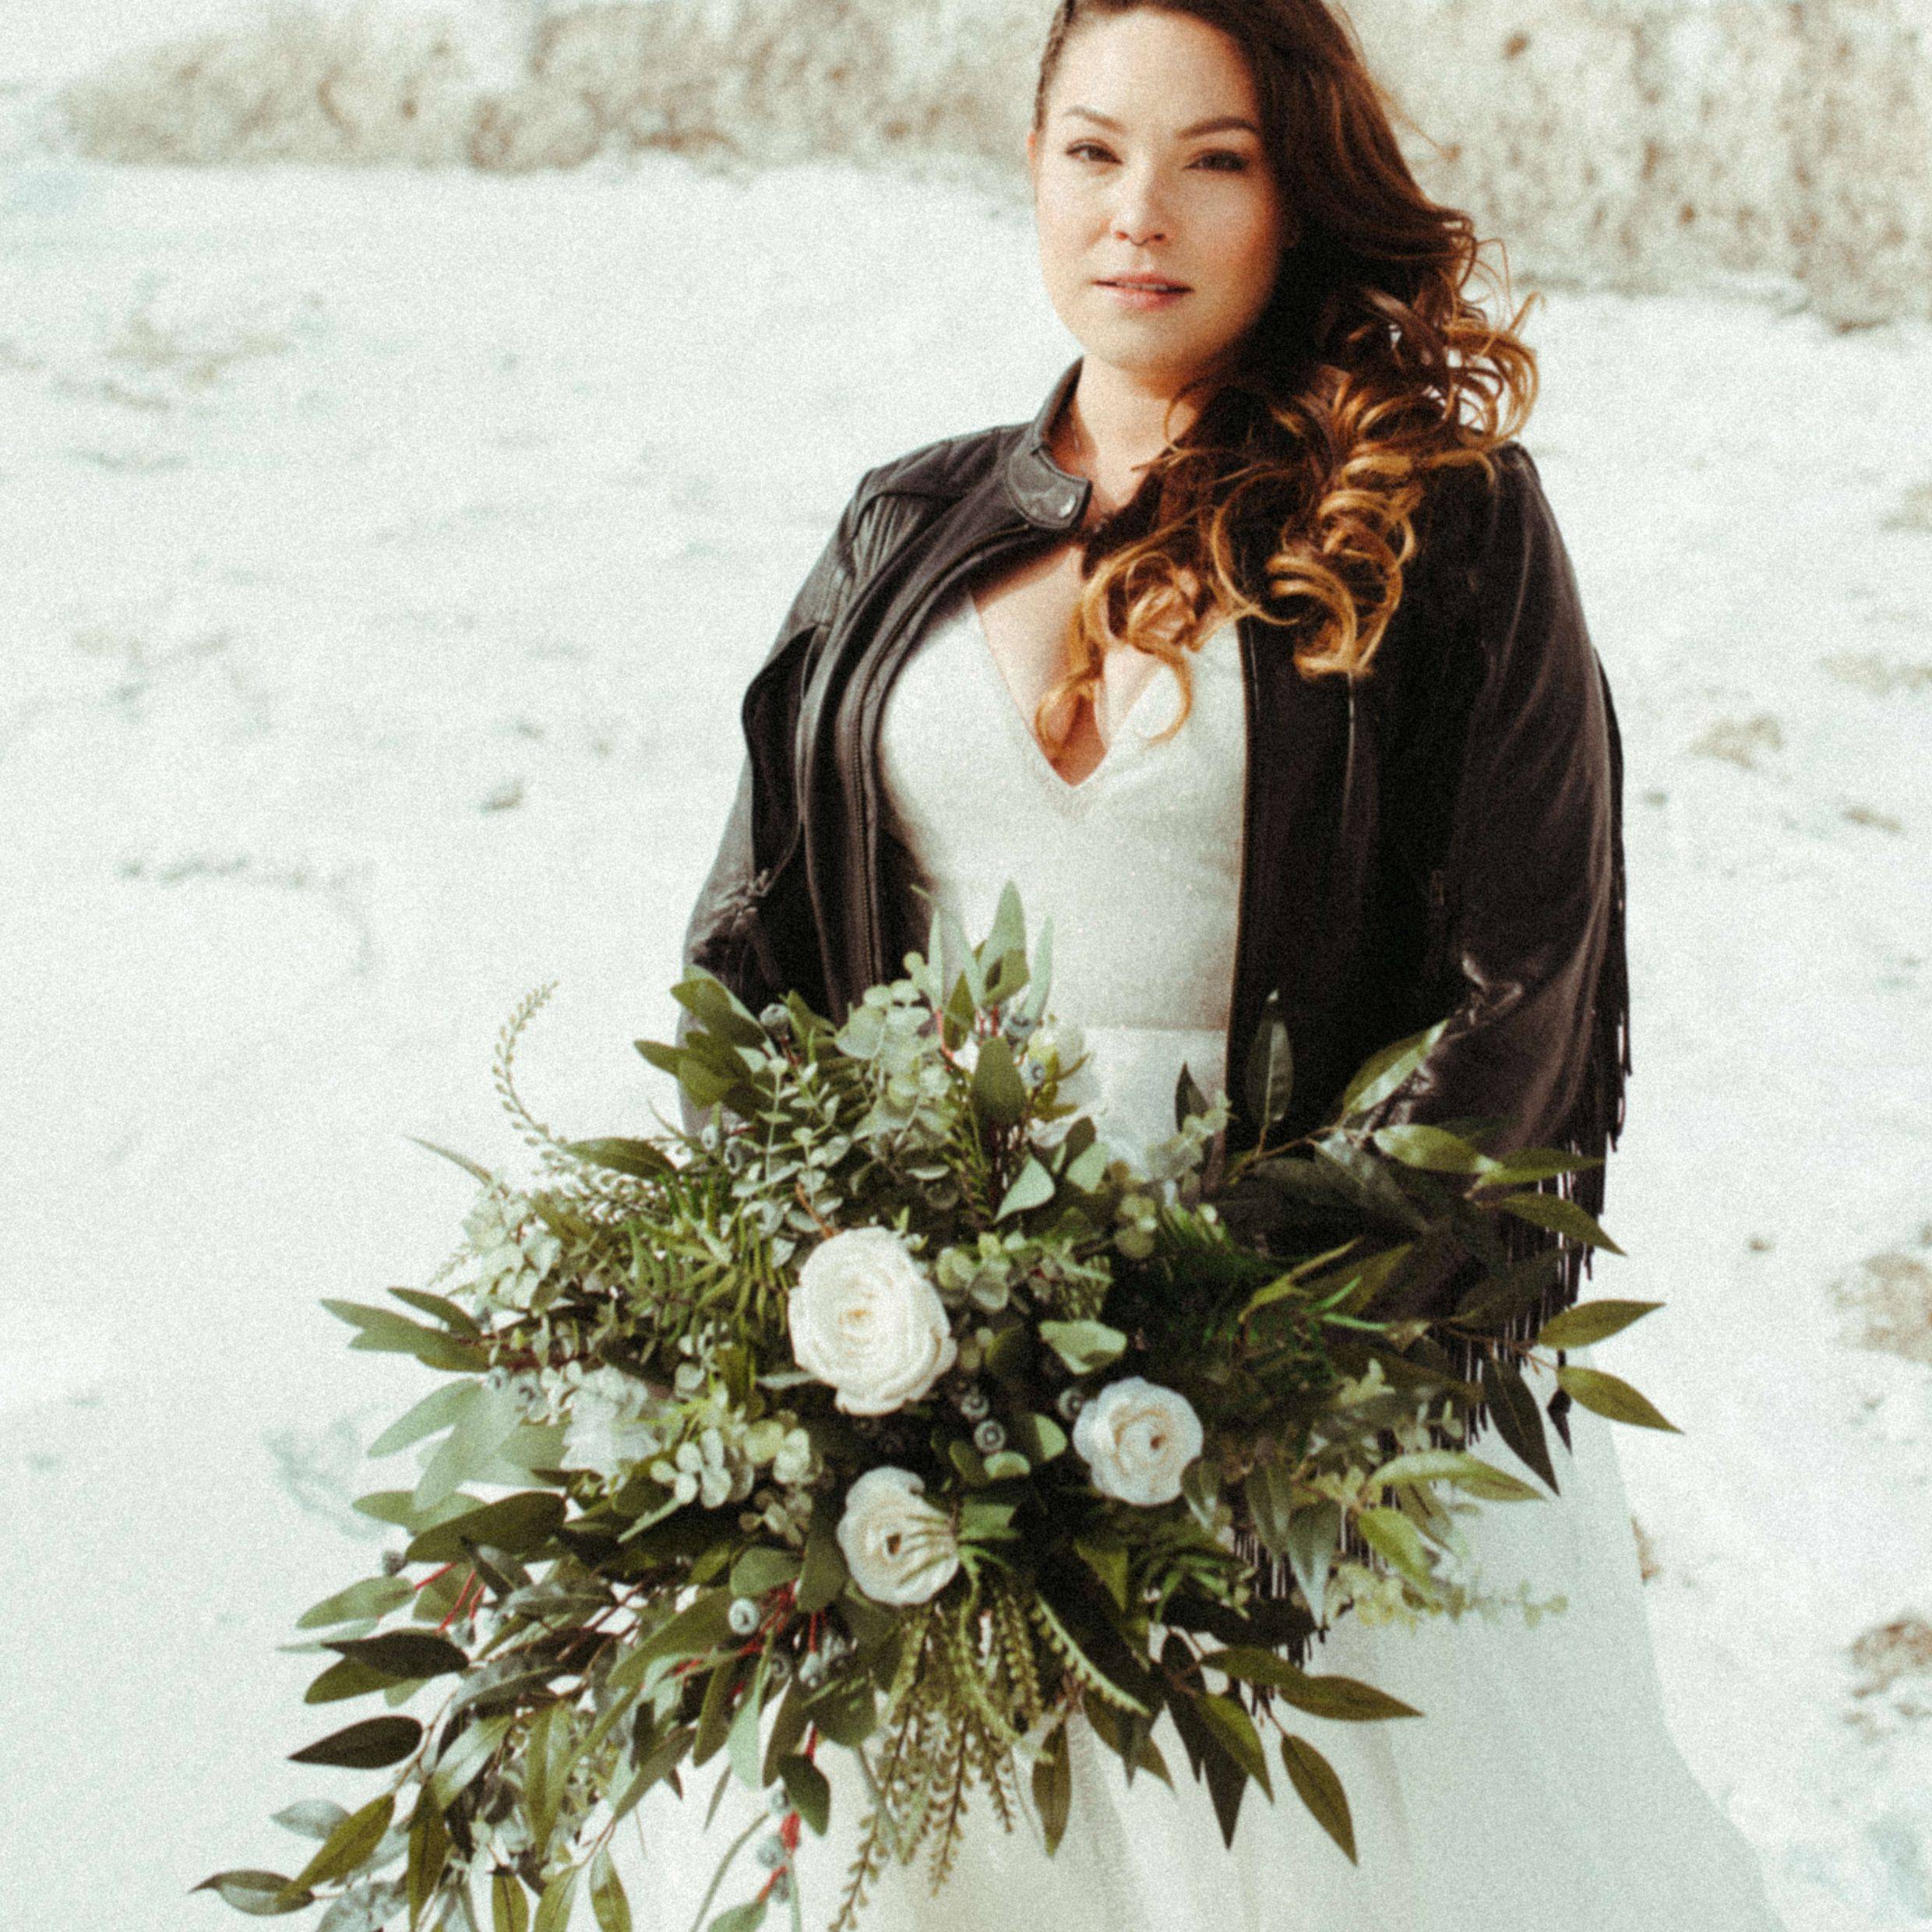 Oversized bridal bouquet with lush eucalyptus and greenery with white ranunculus and roses 